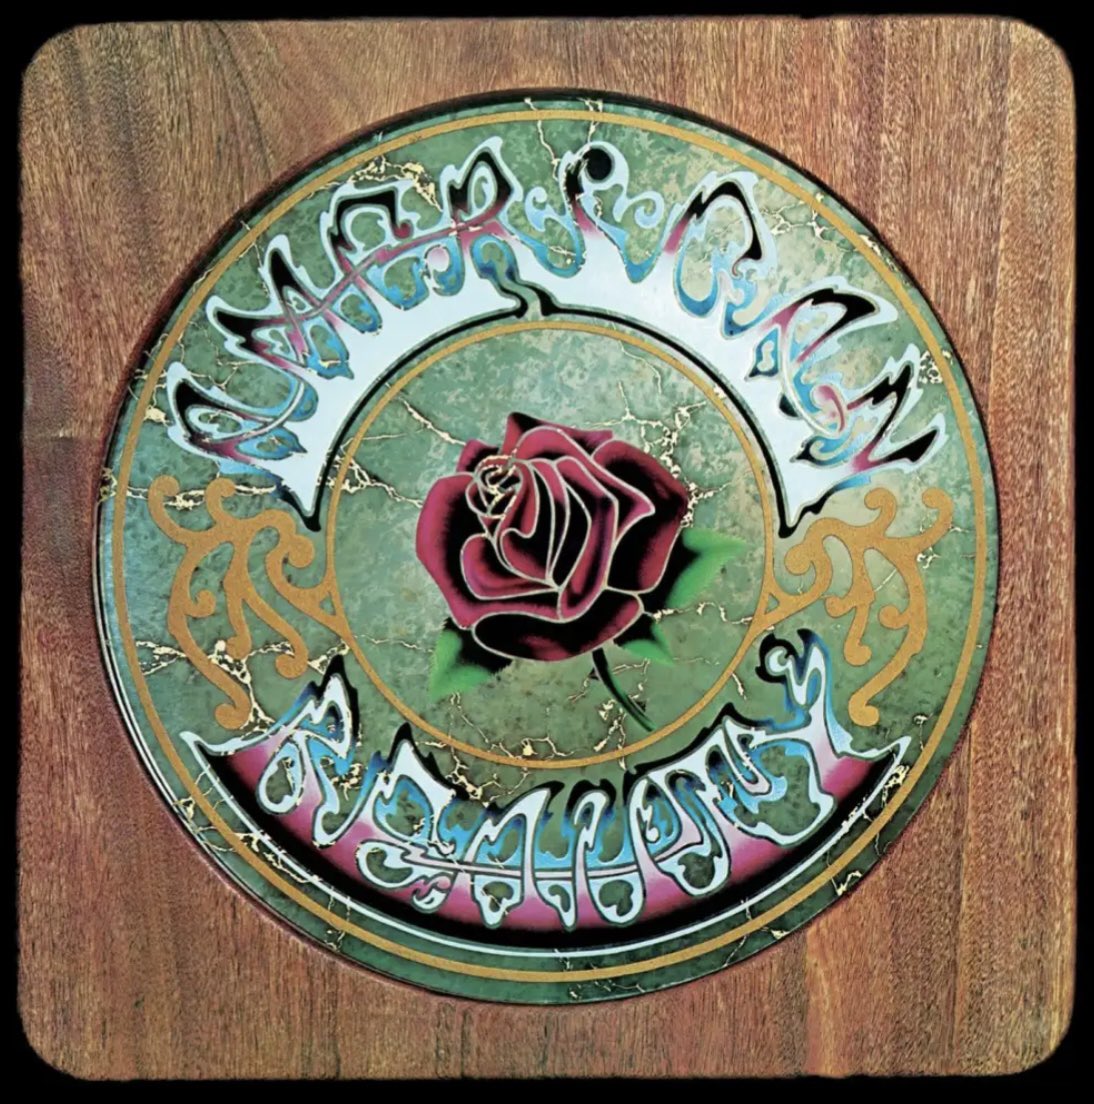 Calling all Deadheads - their 1970 classic American Beauty is my featured album tomorrow online at Coast 1079 6-9pm BST 😎🎶 #gratefuldead #coast1079 #internetradio #internet